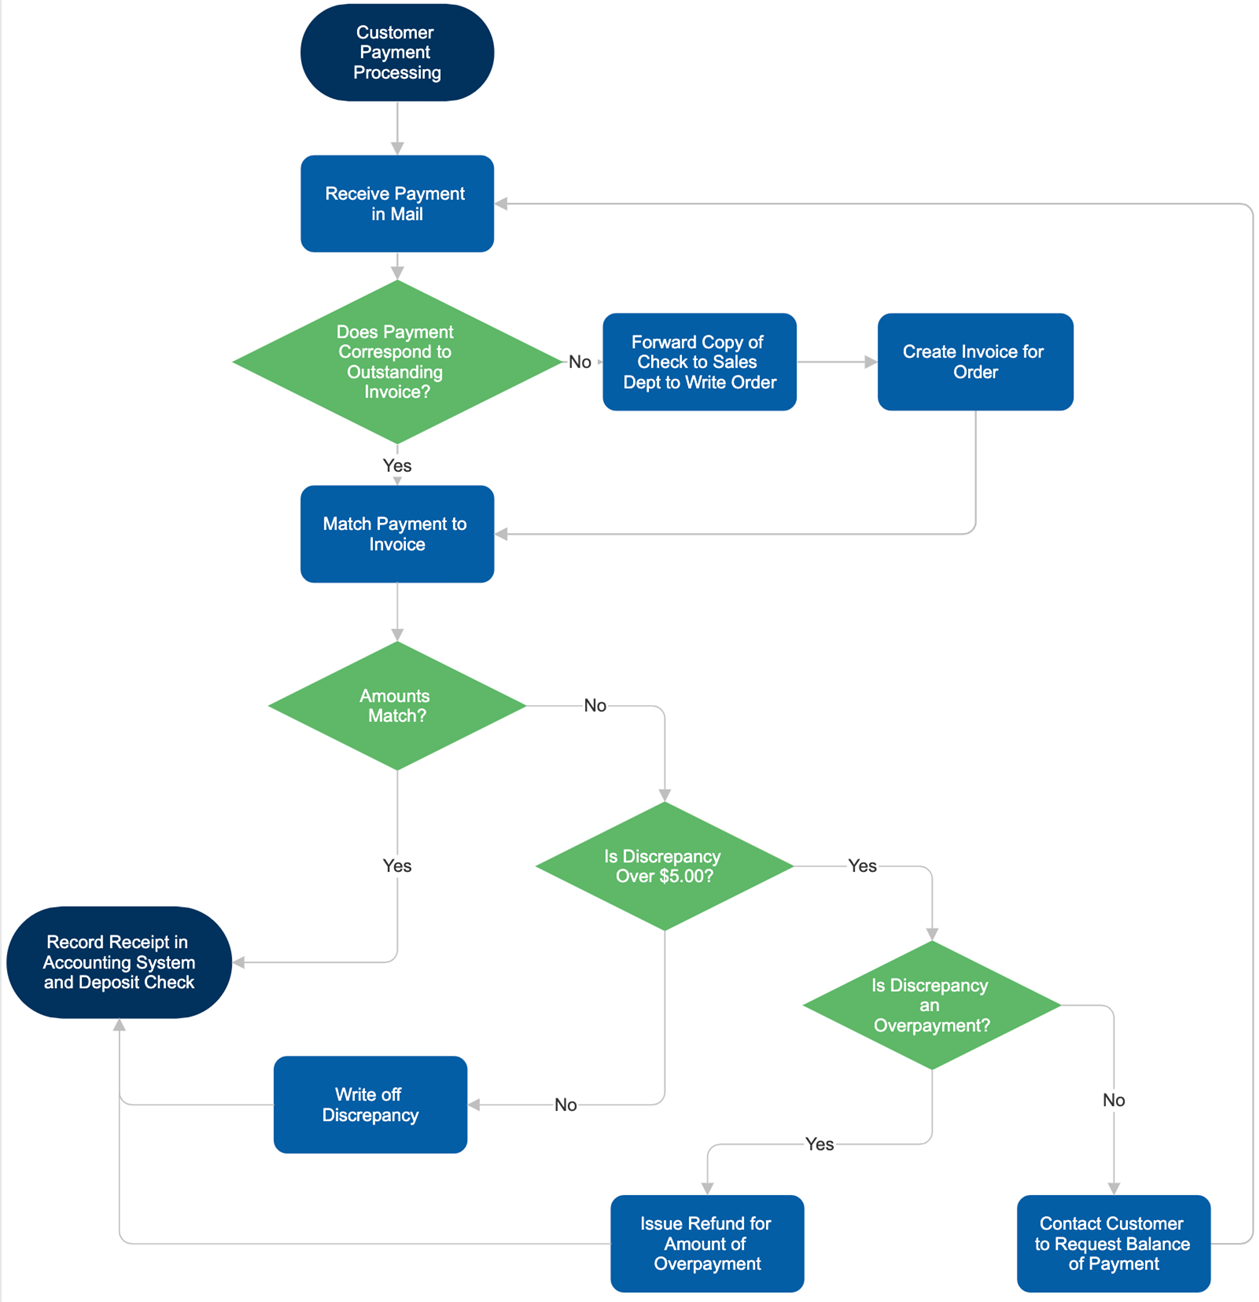 How To Make A Flowchart Create A Flowchart With The Help Of This Flowchart Tutorial 8067